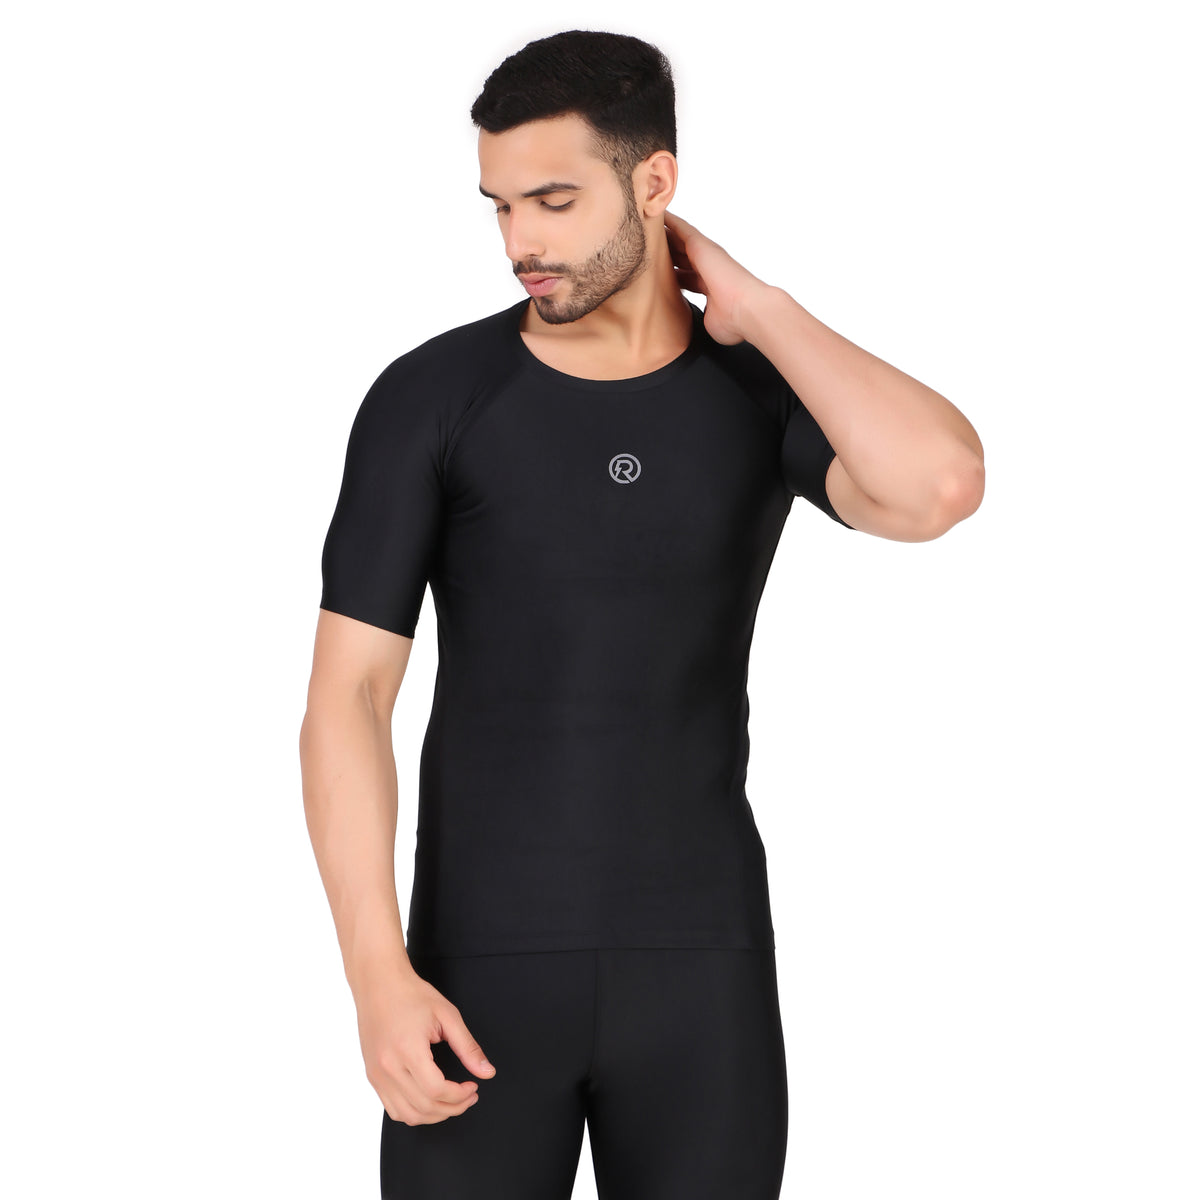 Recharge Polyester Compression Top Half Sleeve (Black)